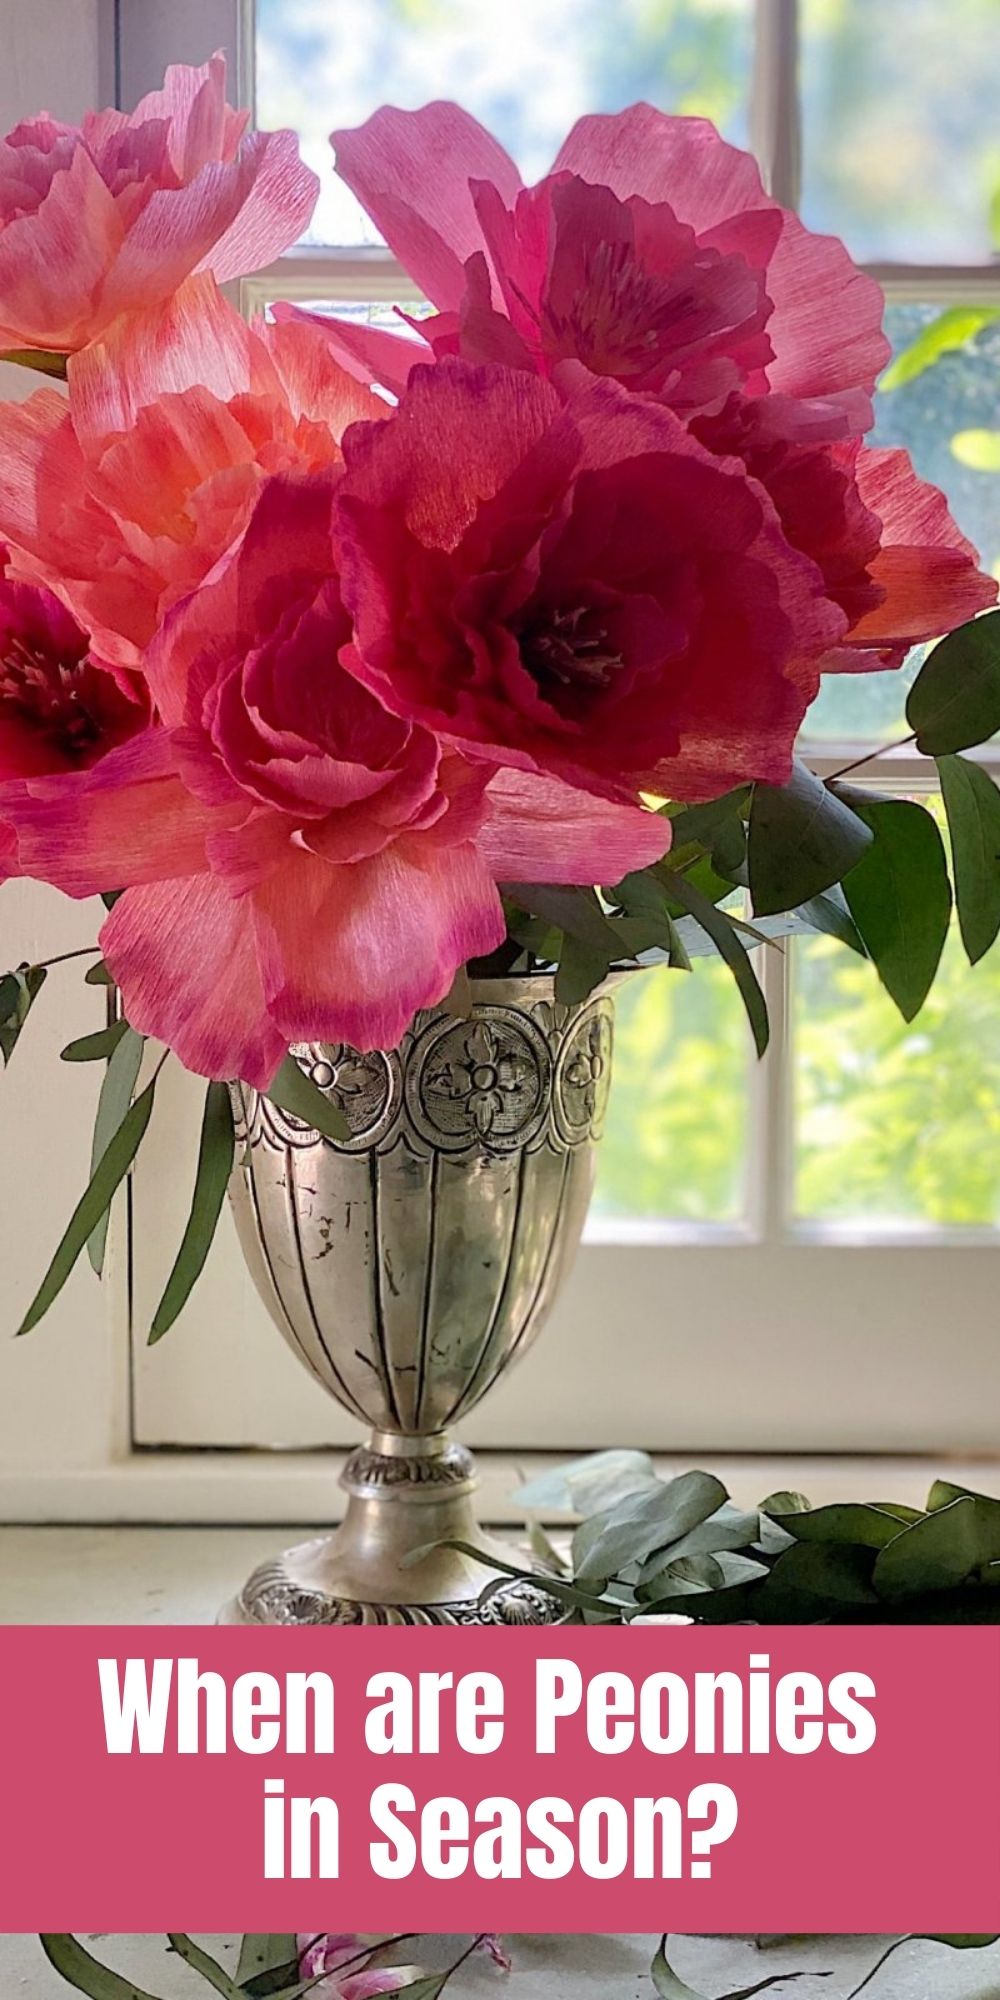 I love pink peonies, white peonies, and every kind of peony. So when are peonies in season so I can make a peonies bouquet for my kitchen?